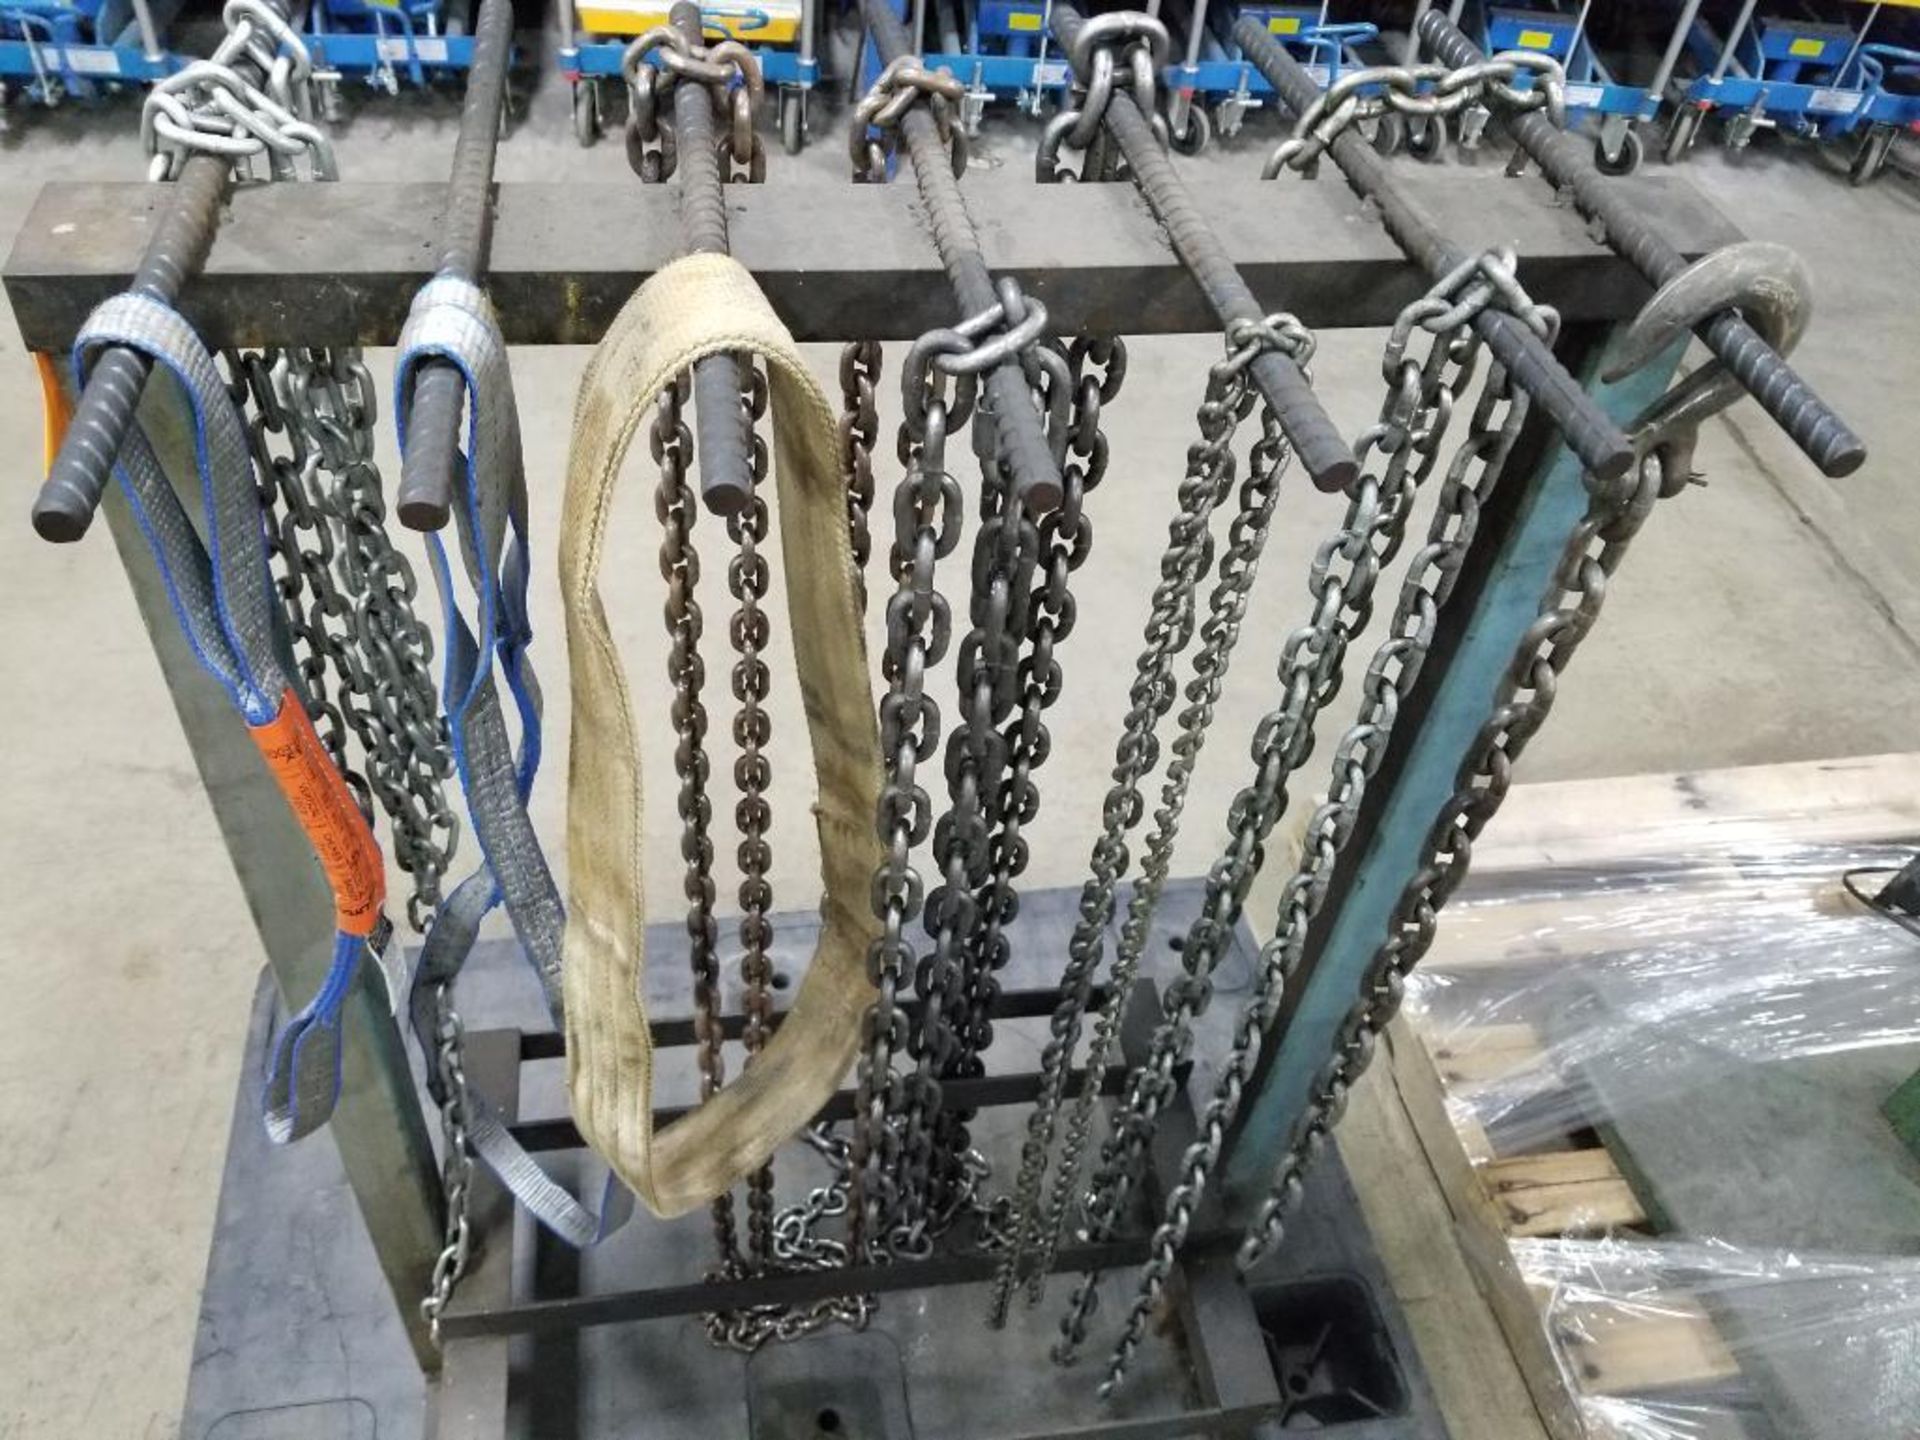 Chain-fall / straps rack, includes chains and lifting straps as pictured. - Image 3 of 4